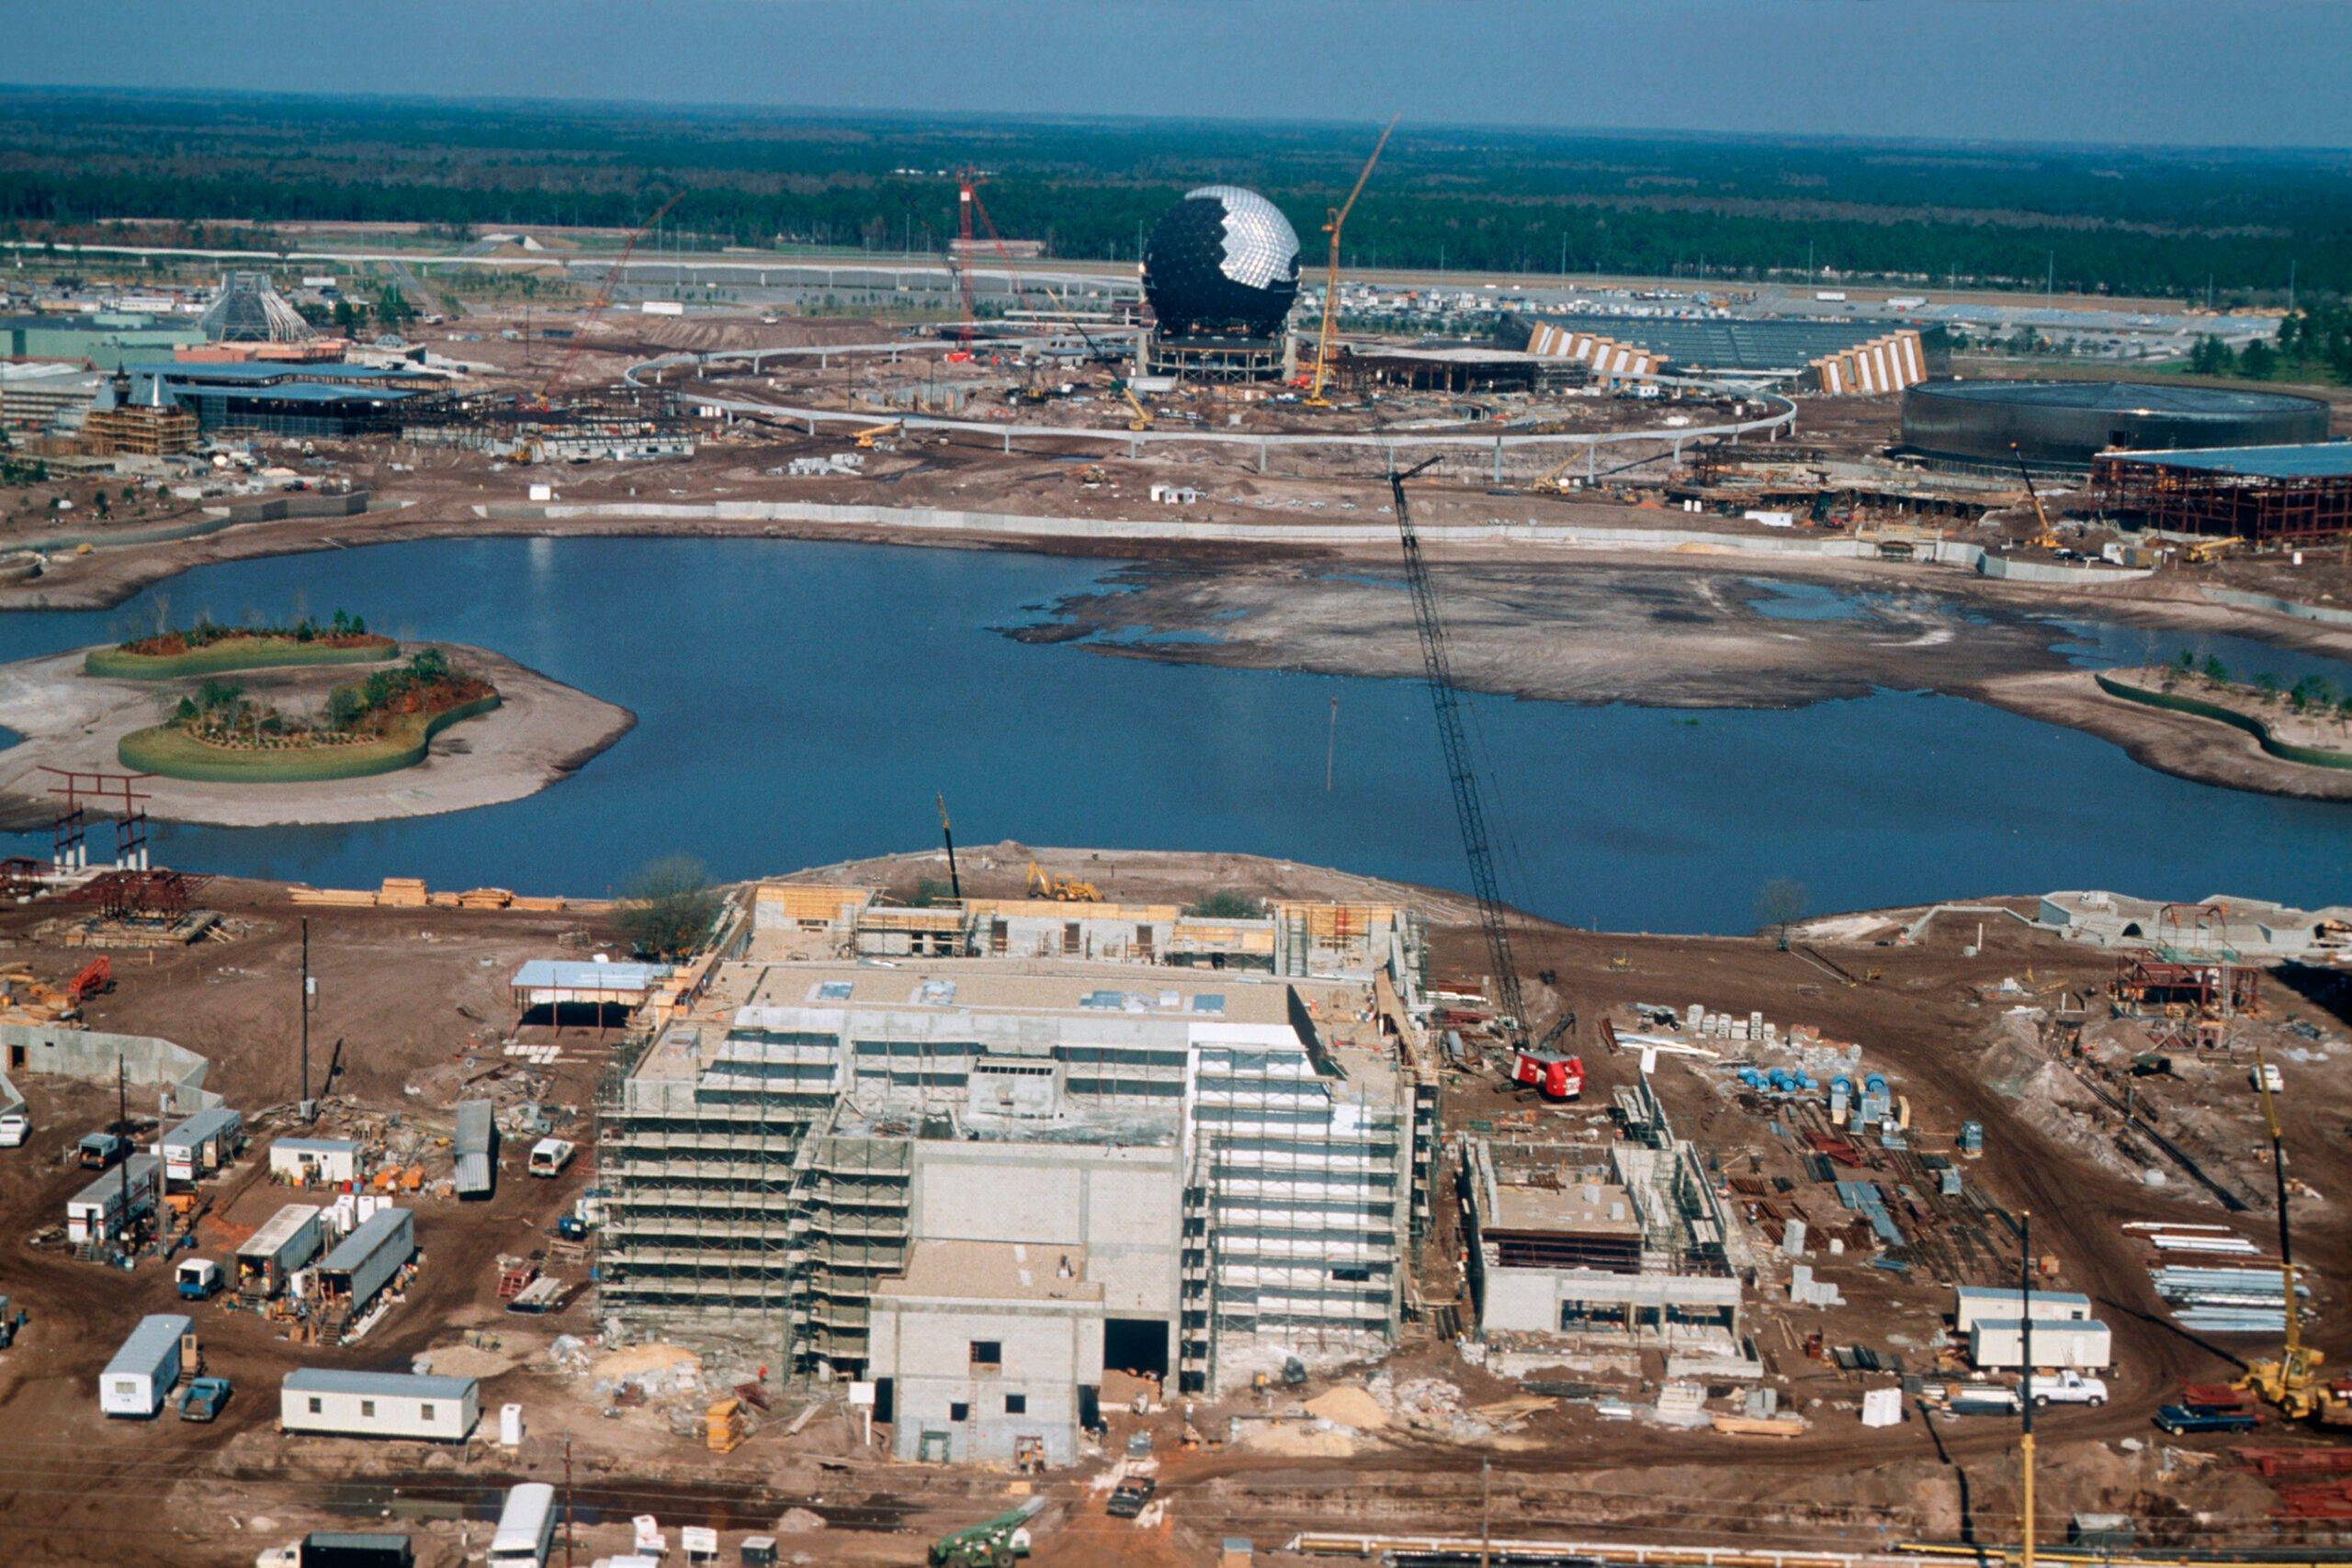 Five Decades of Magic at Walt Disney World - A look at some rare construction photos from 1980 - 1989